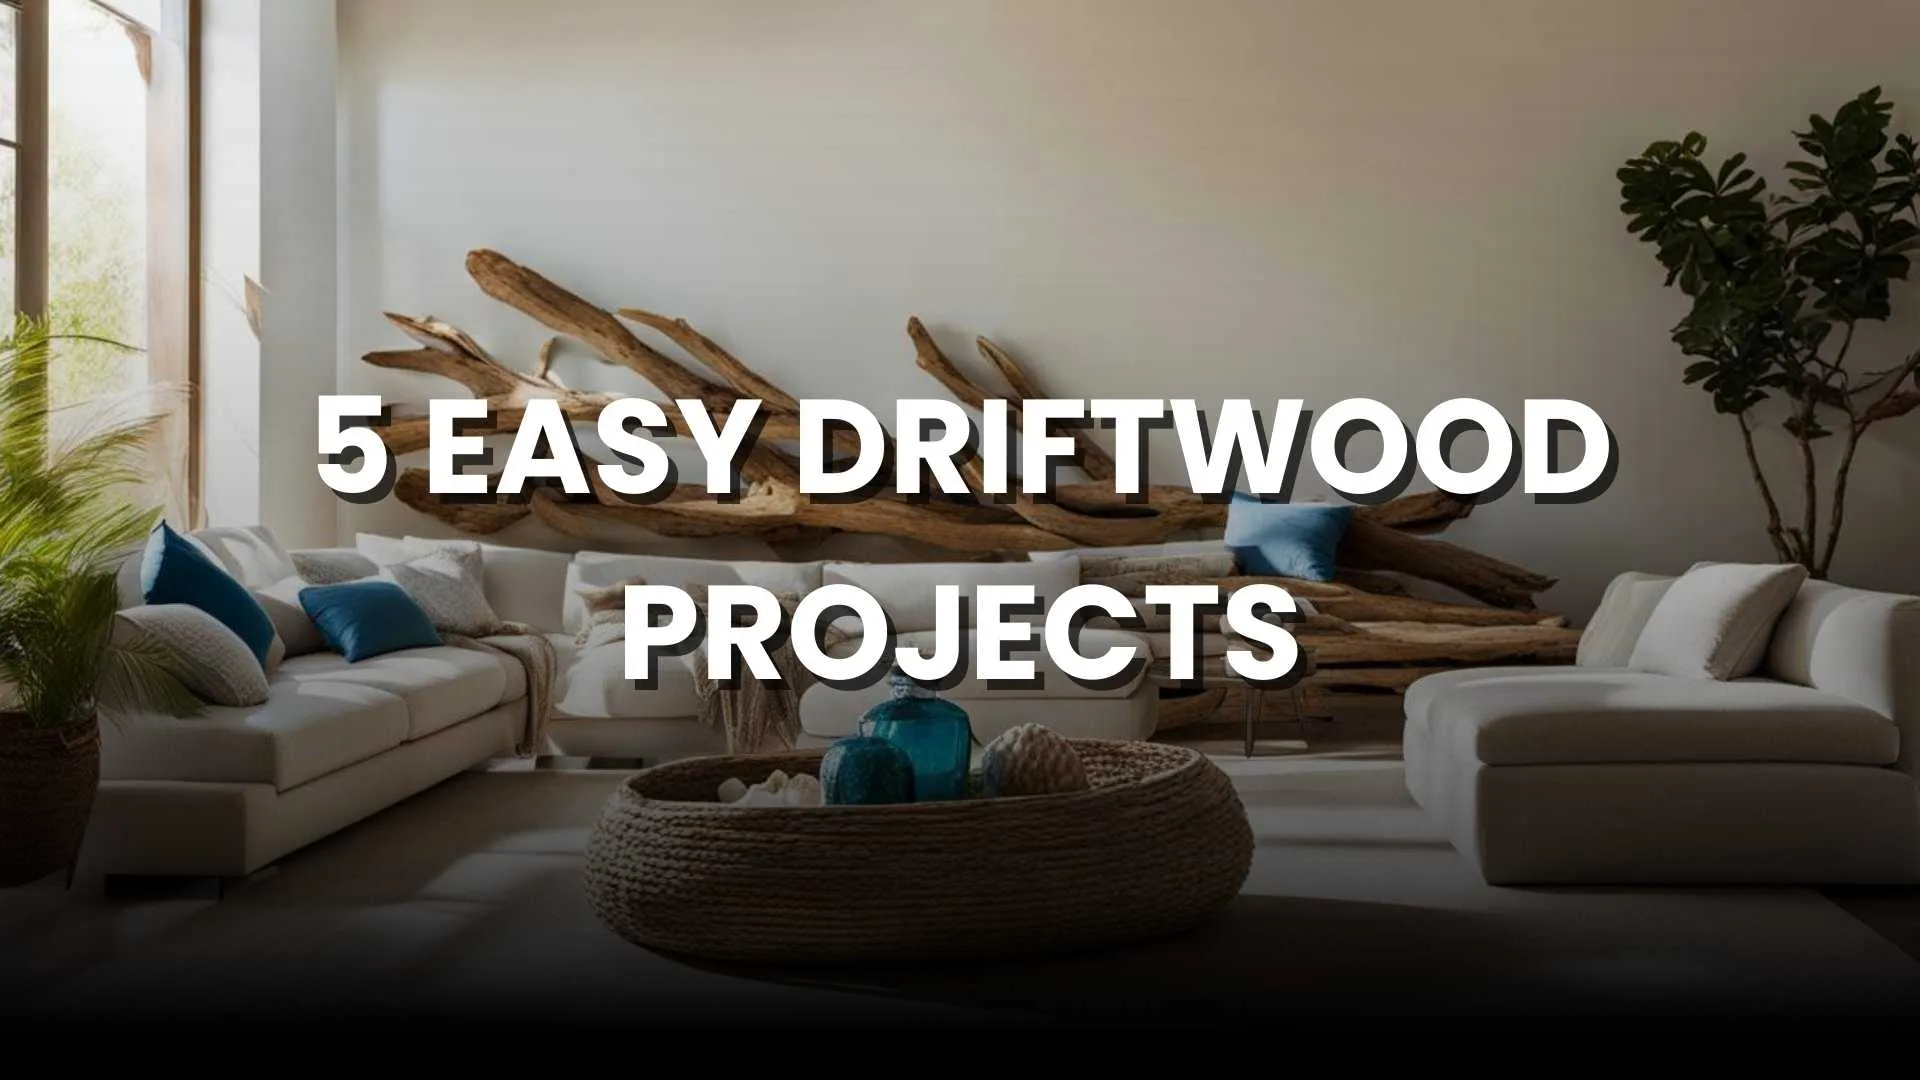 5 easy driftwood projects